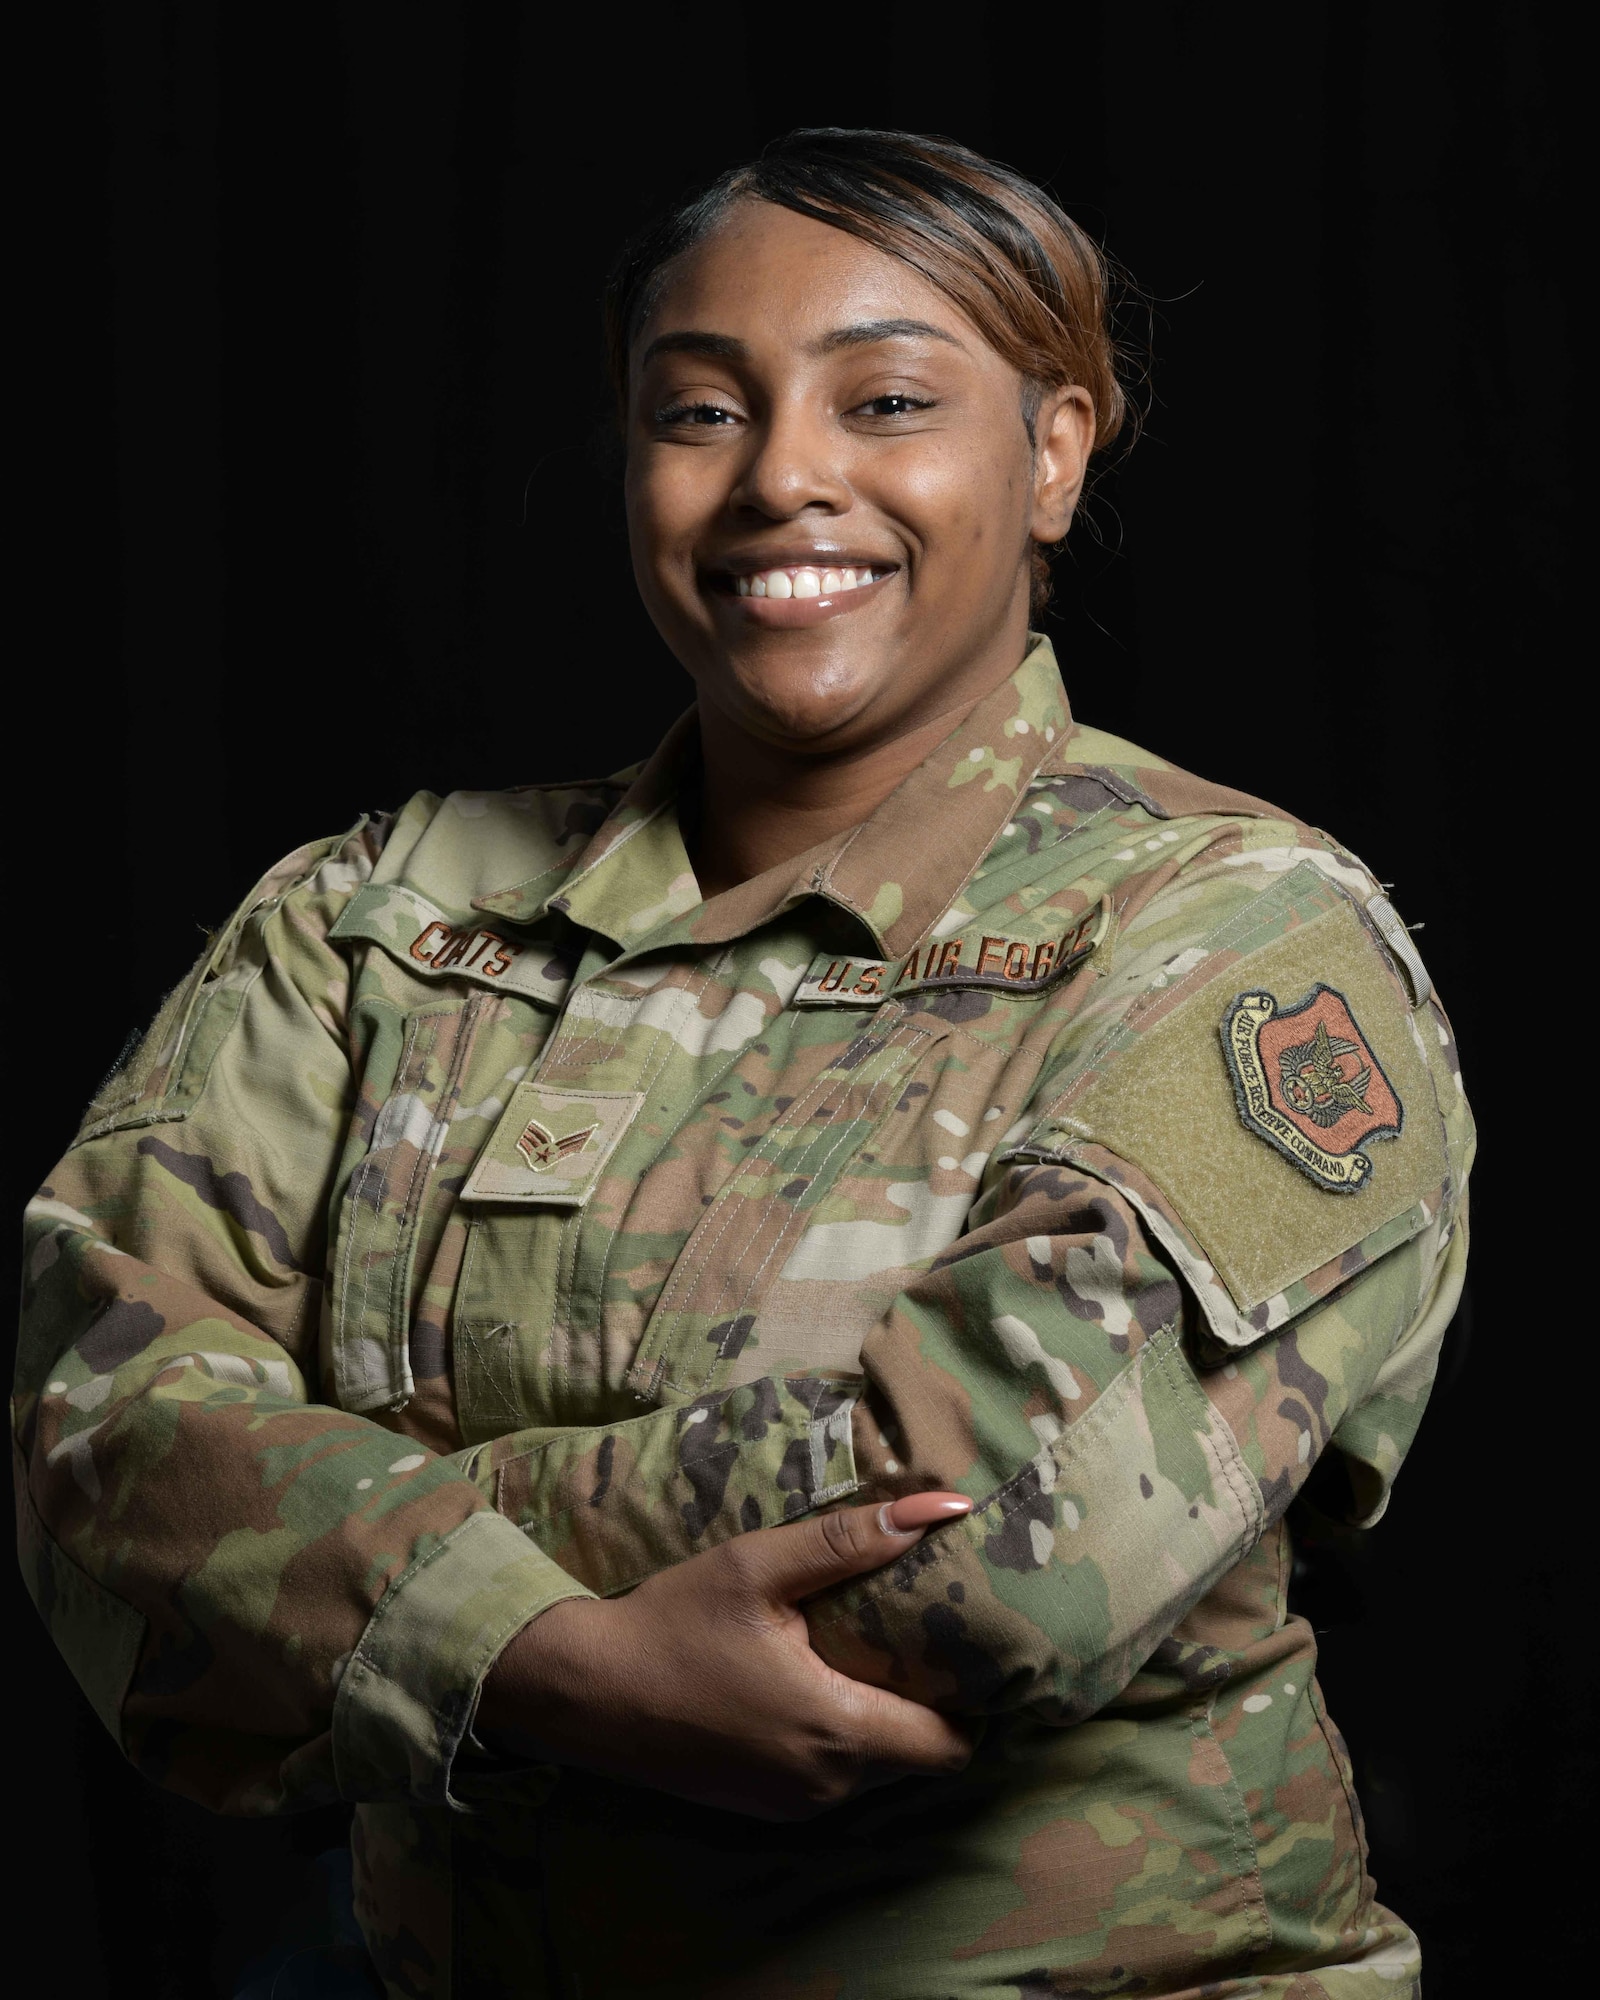 In honor of Black History Month, the 910th Airlift Wing is highlighting its diverse team of Airmen who keep the wing "Combat ready NOW...for tomorrow's fight!" as the wing's mission statement goes.